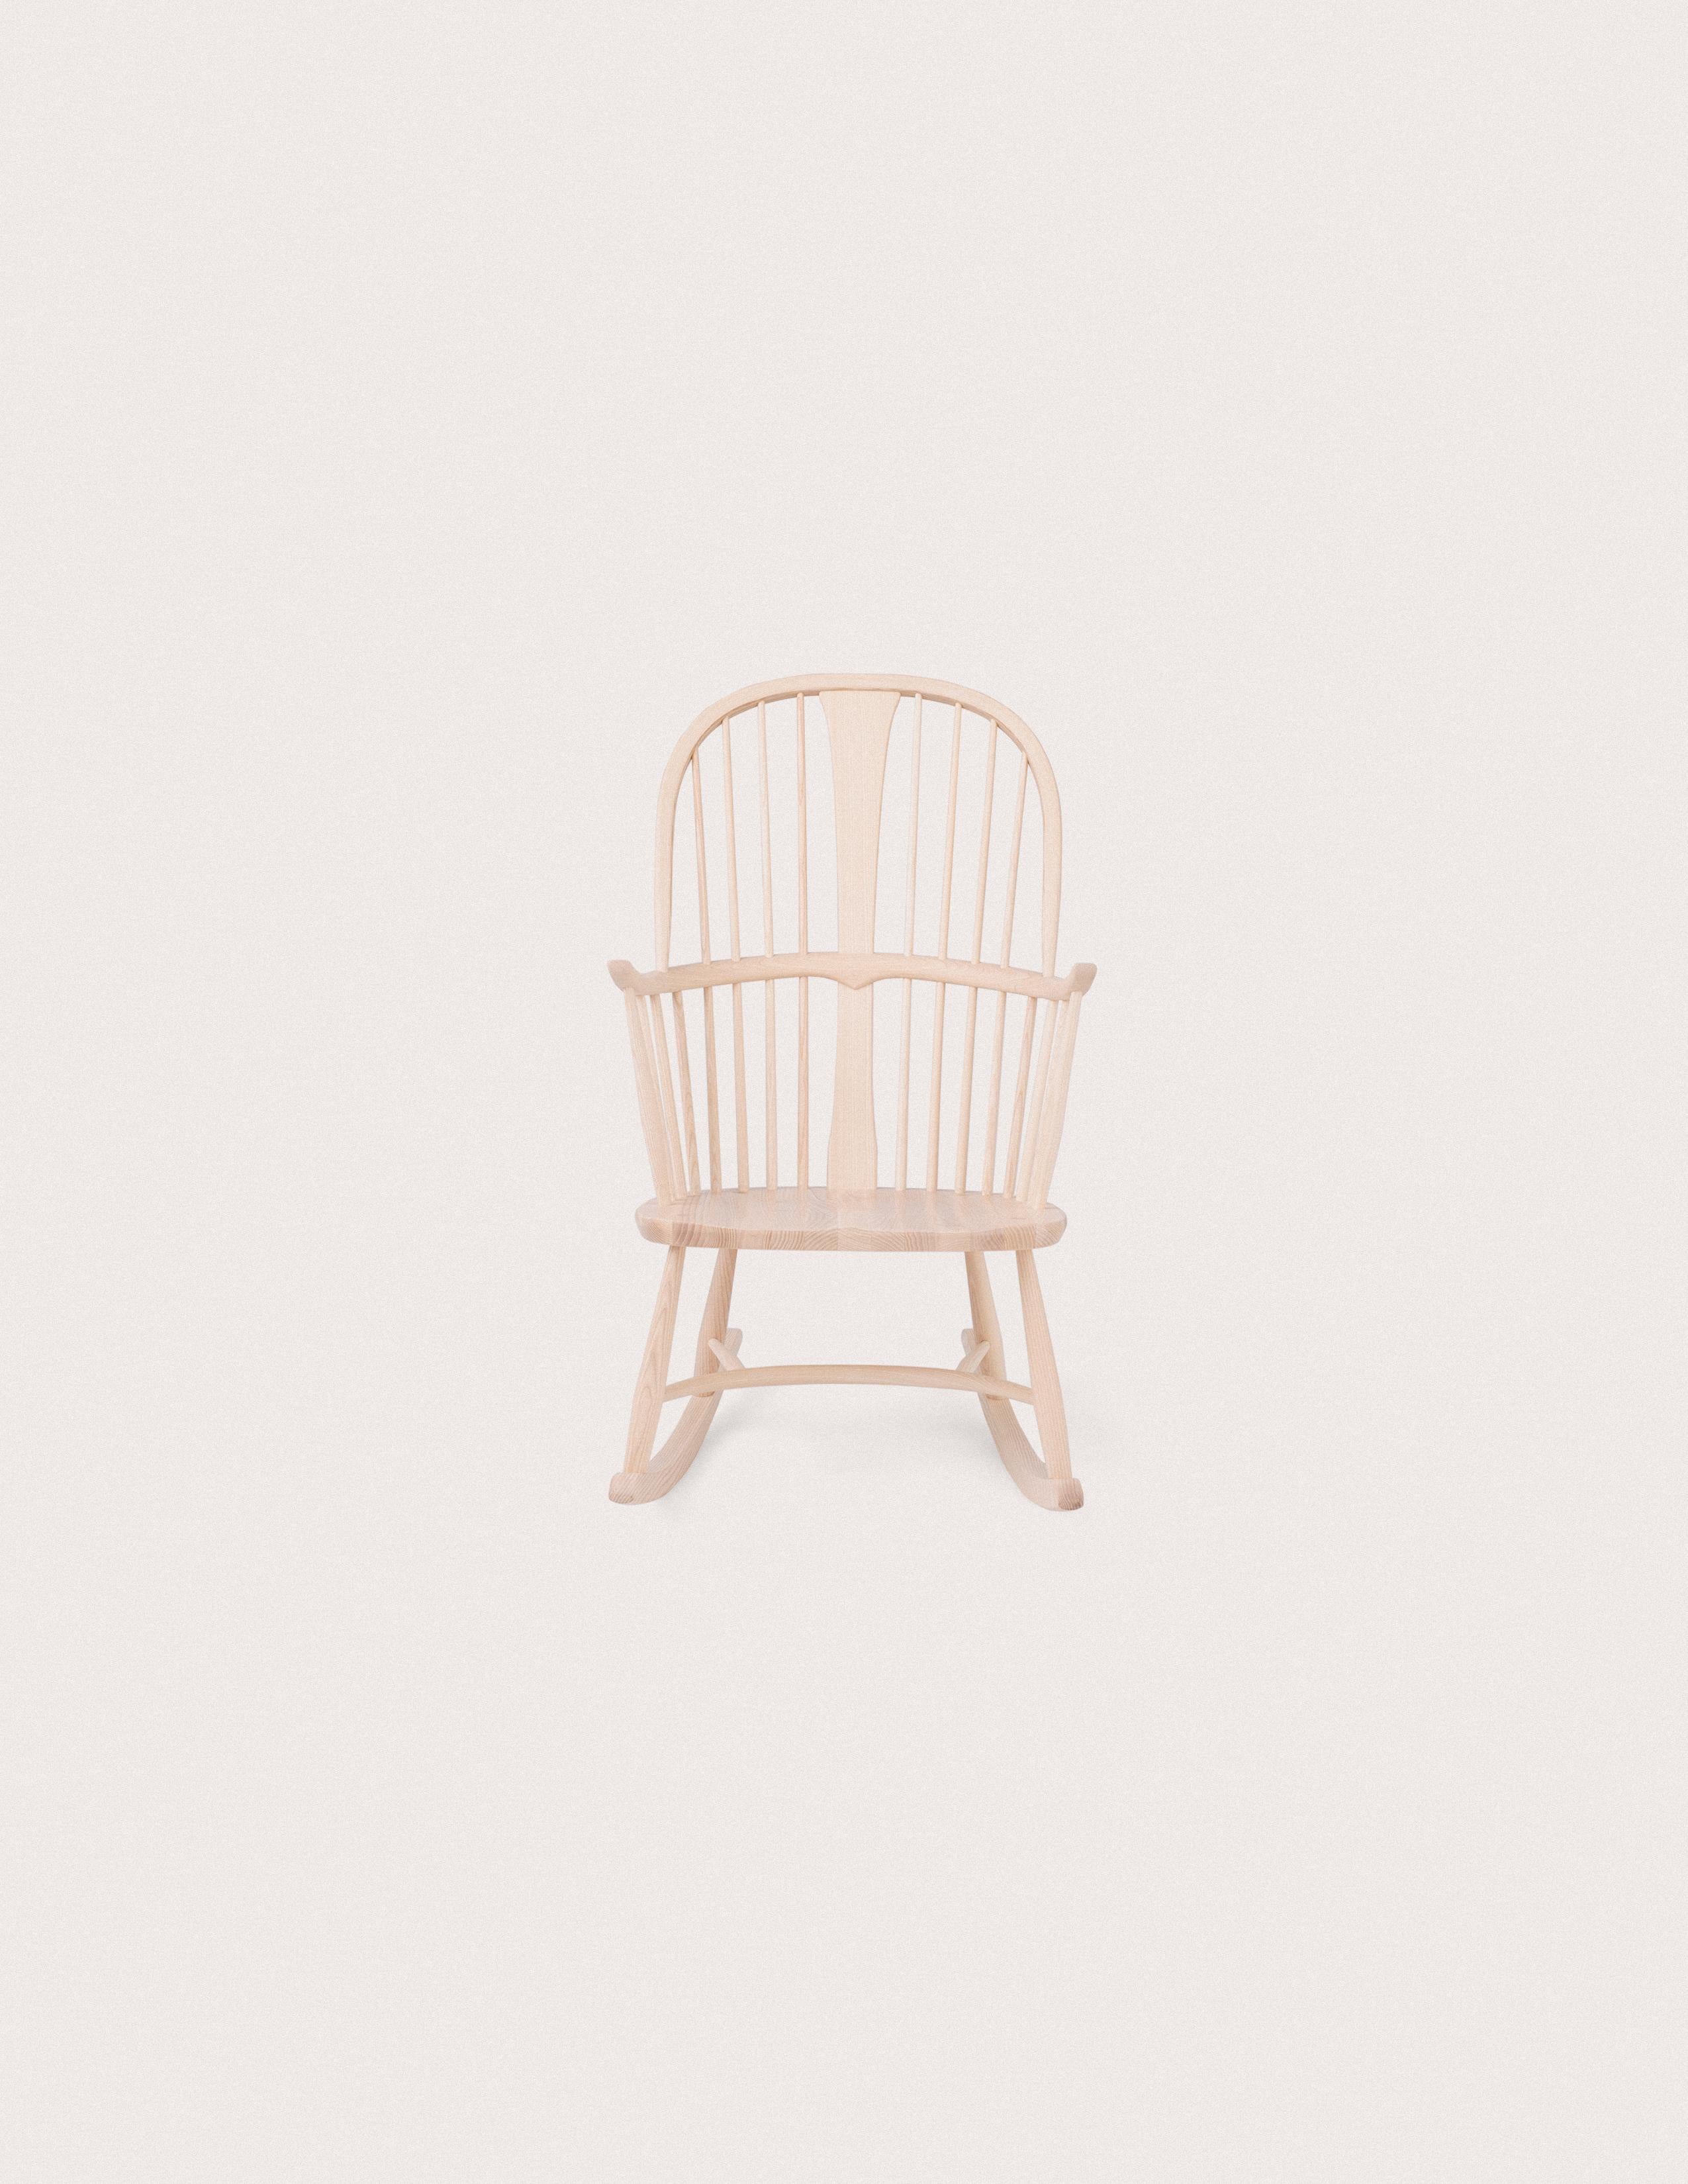 Few forms convey the warm, familiar essence of home as succinctly as that of the rocking chair.

Since the beginning of time, designers and craftsmen have experienced a profound, oftentimes intuitive connection to wood as a building material.